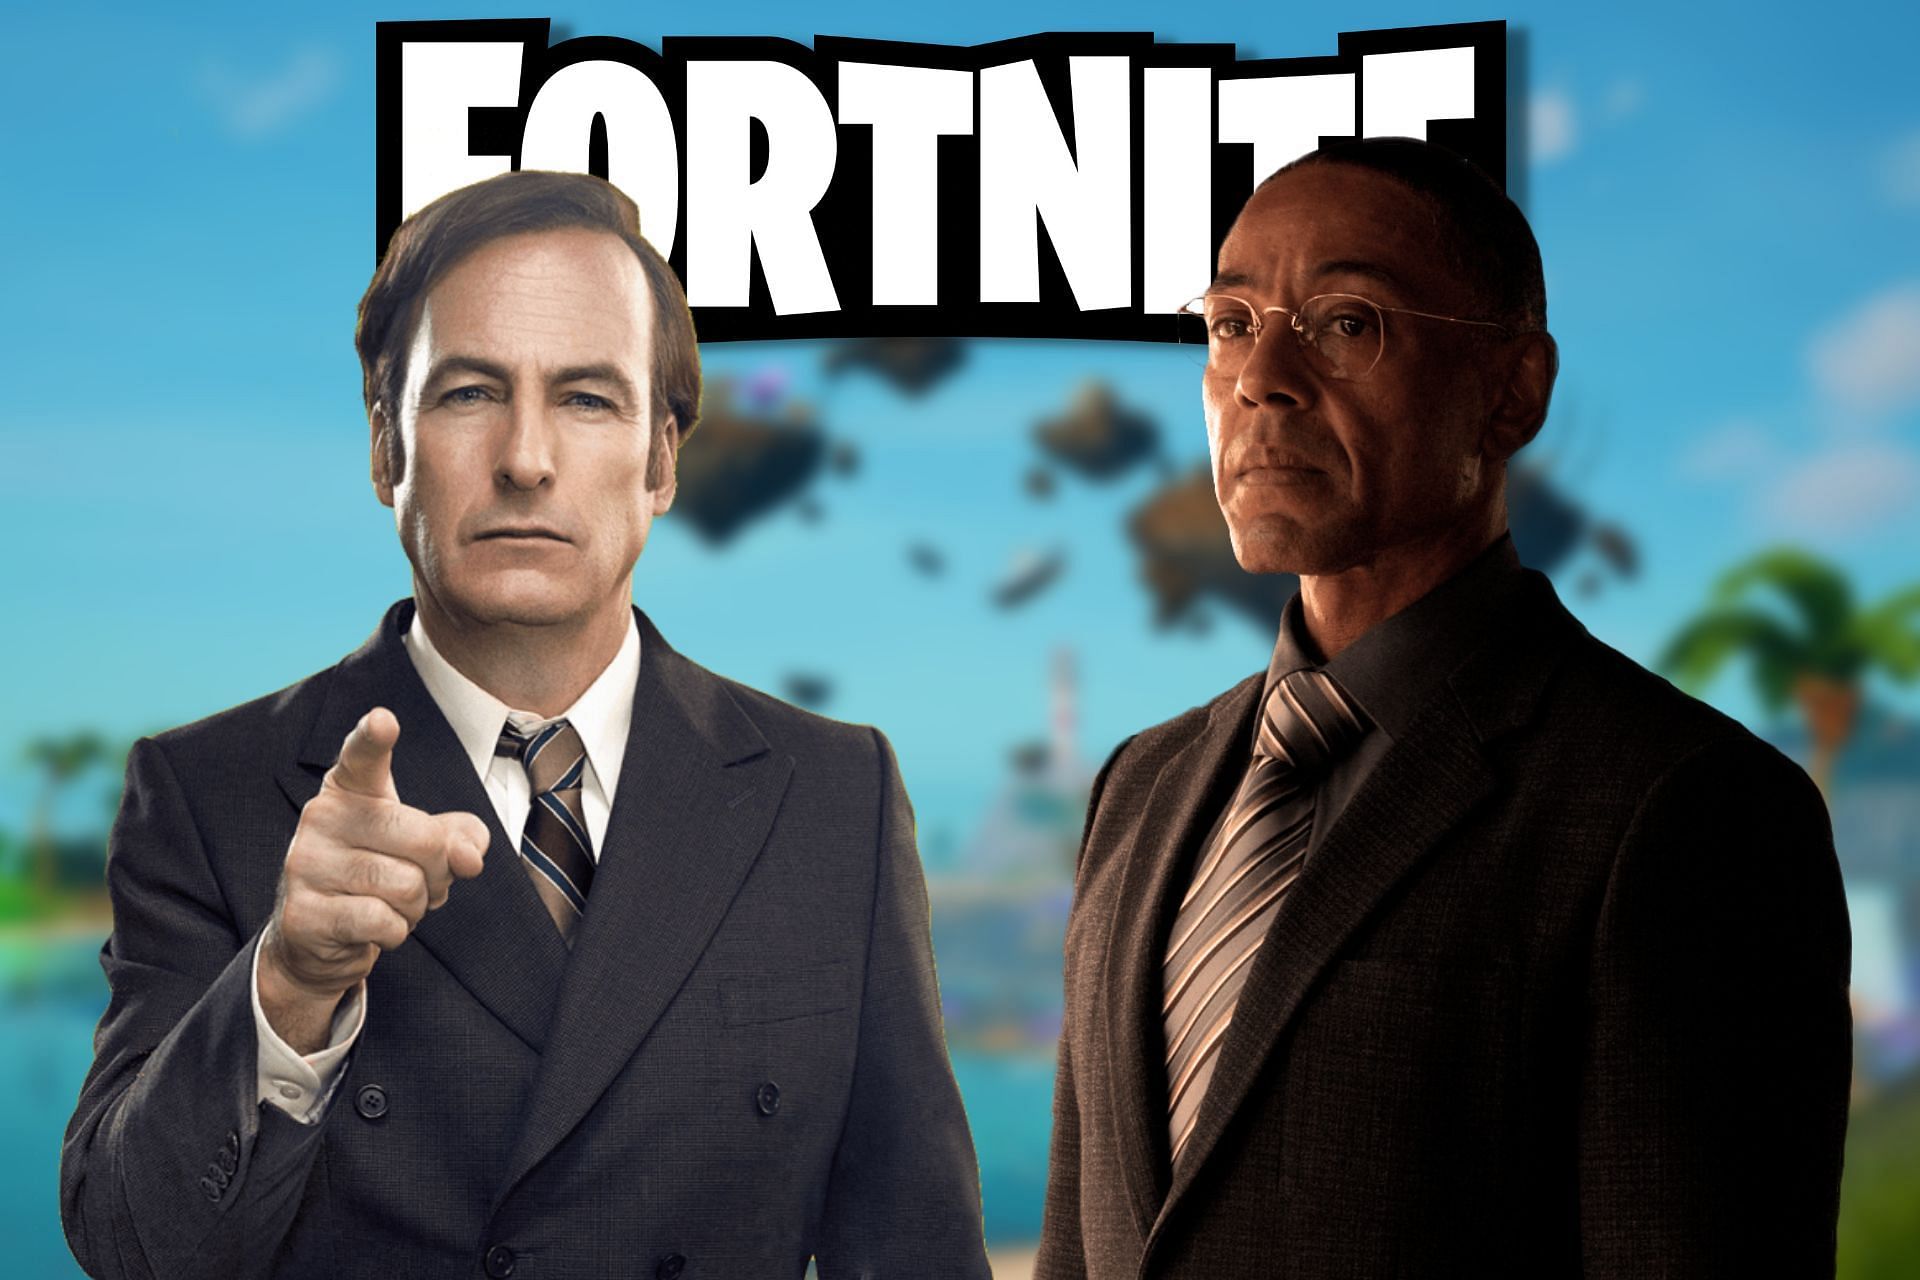 Fortnite fan comes up with the best Breaking Bad/Better Call Saul crossover concept (Image via Sportskeeda)